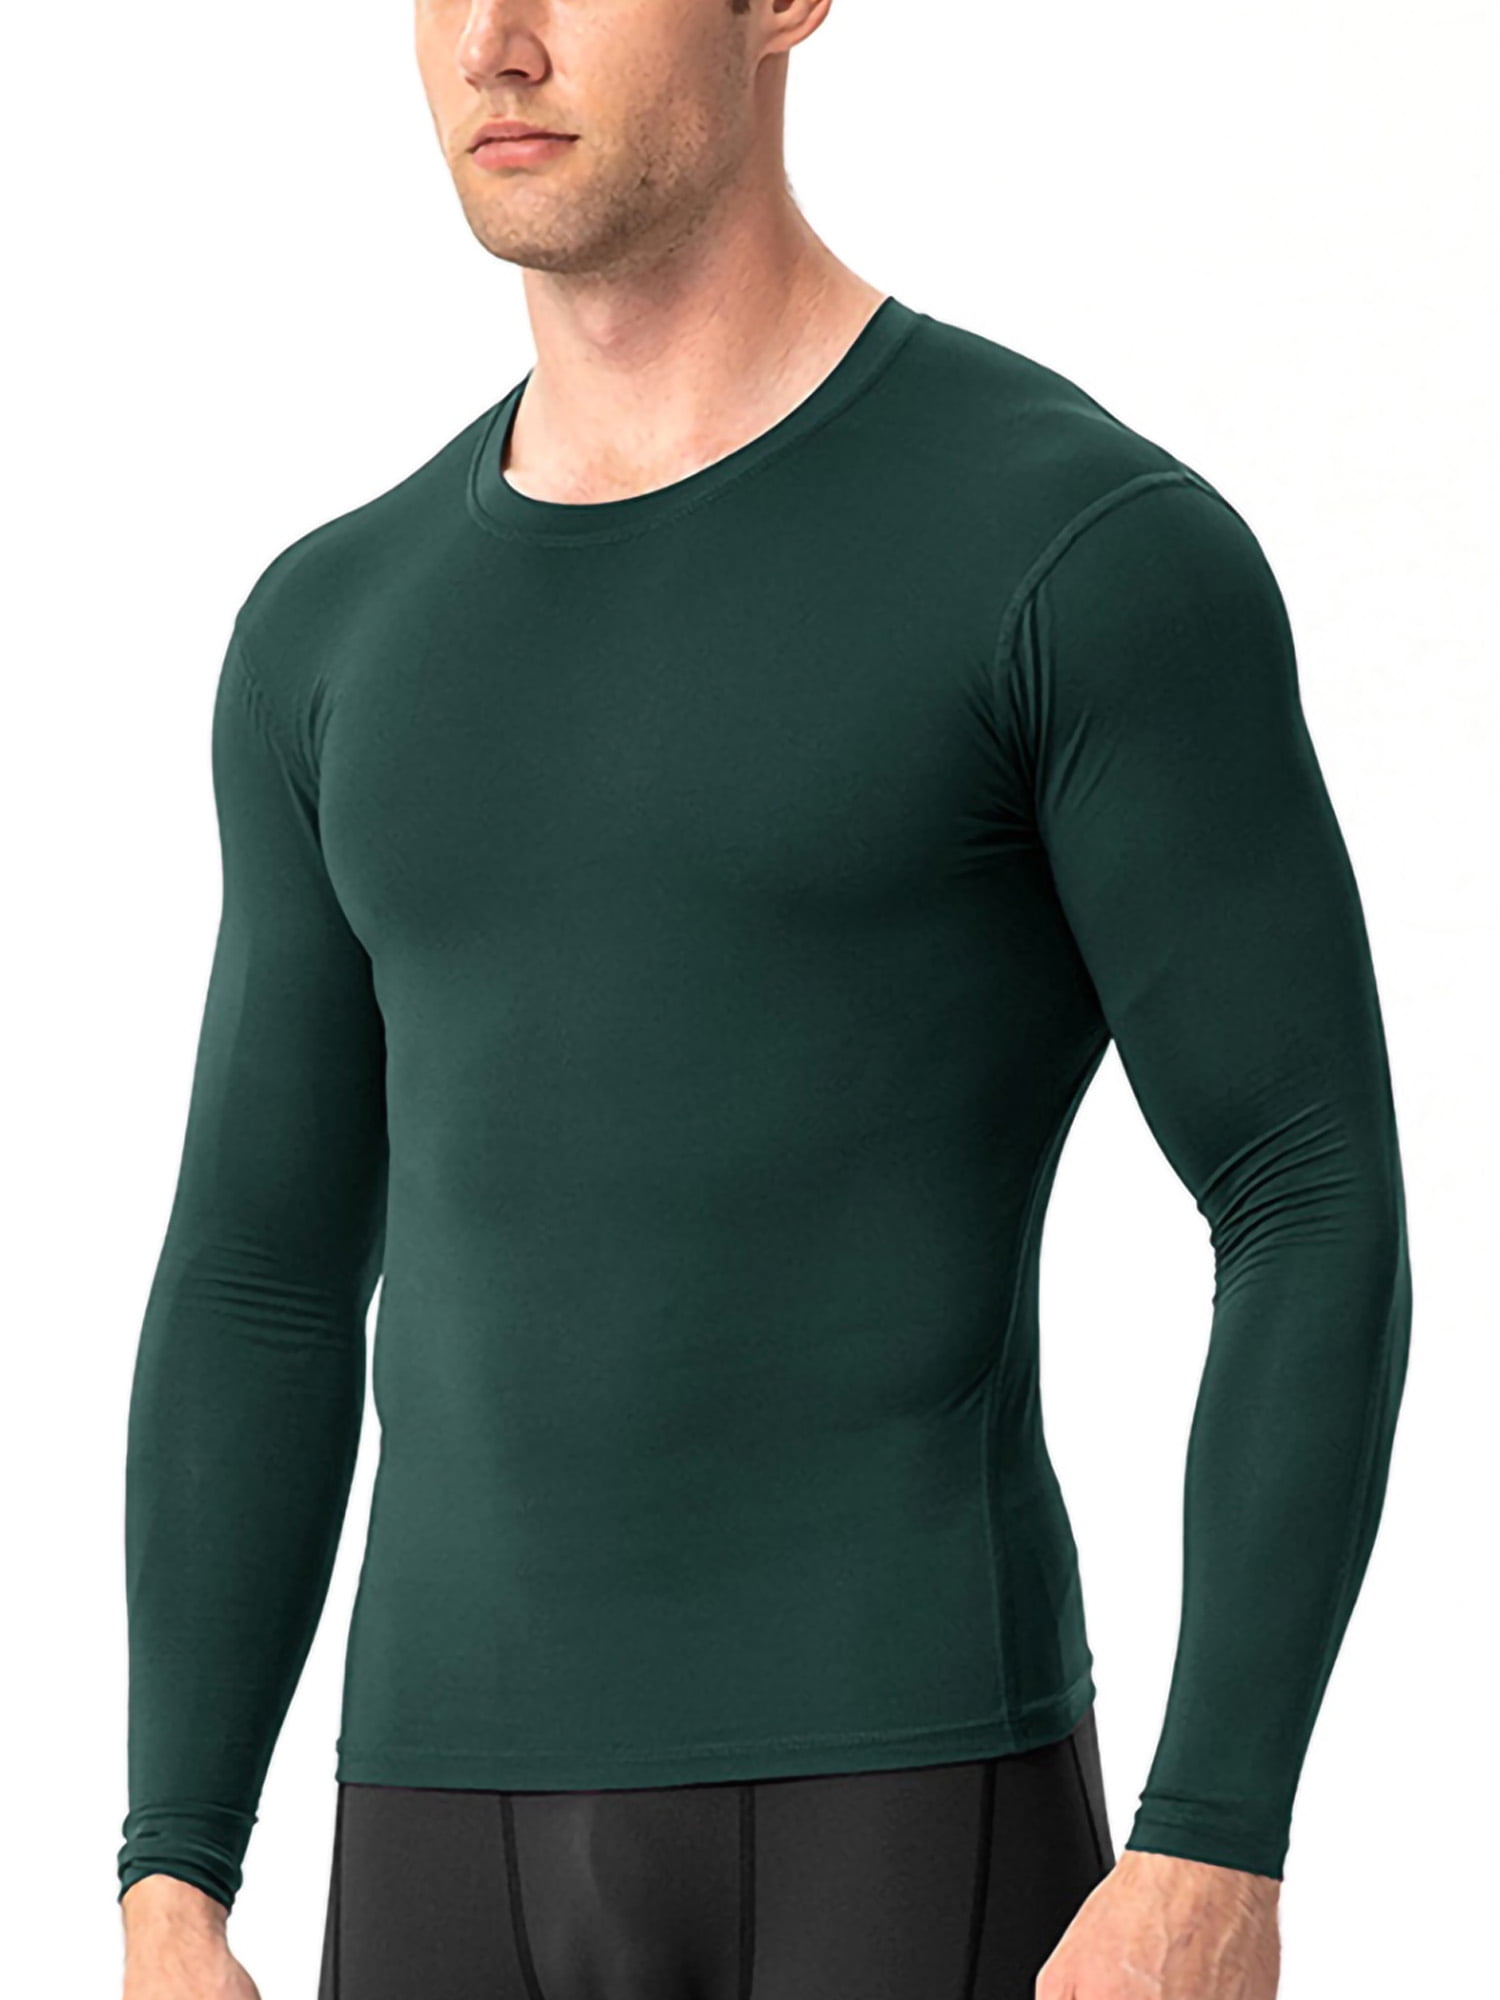 Men's Compression Running Baselayer Athletic Cool Dry Sports